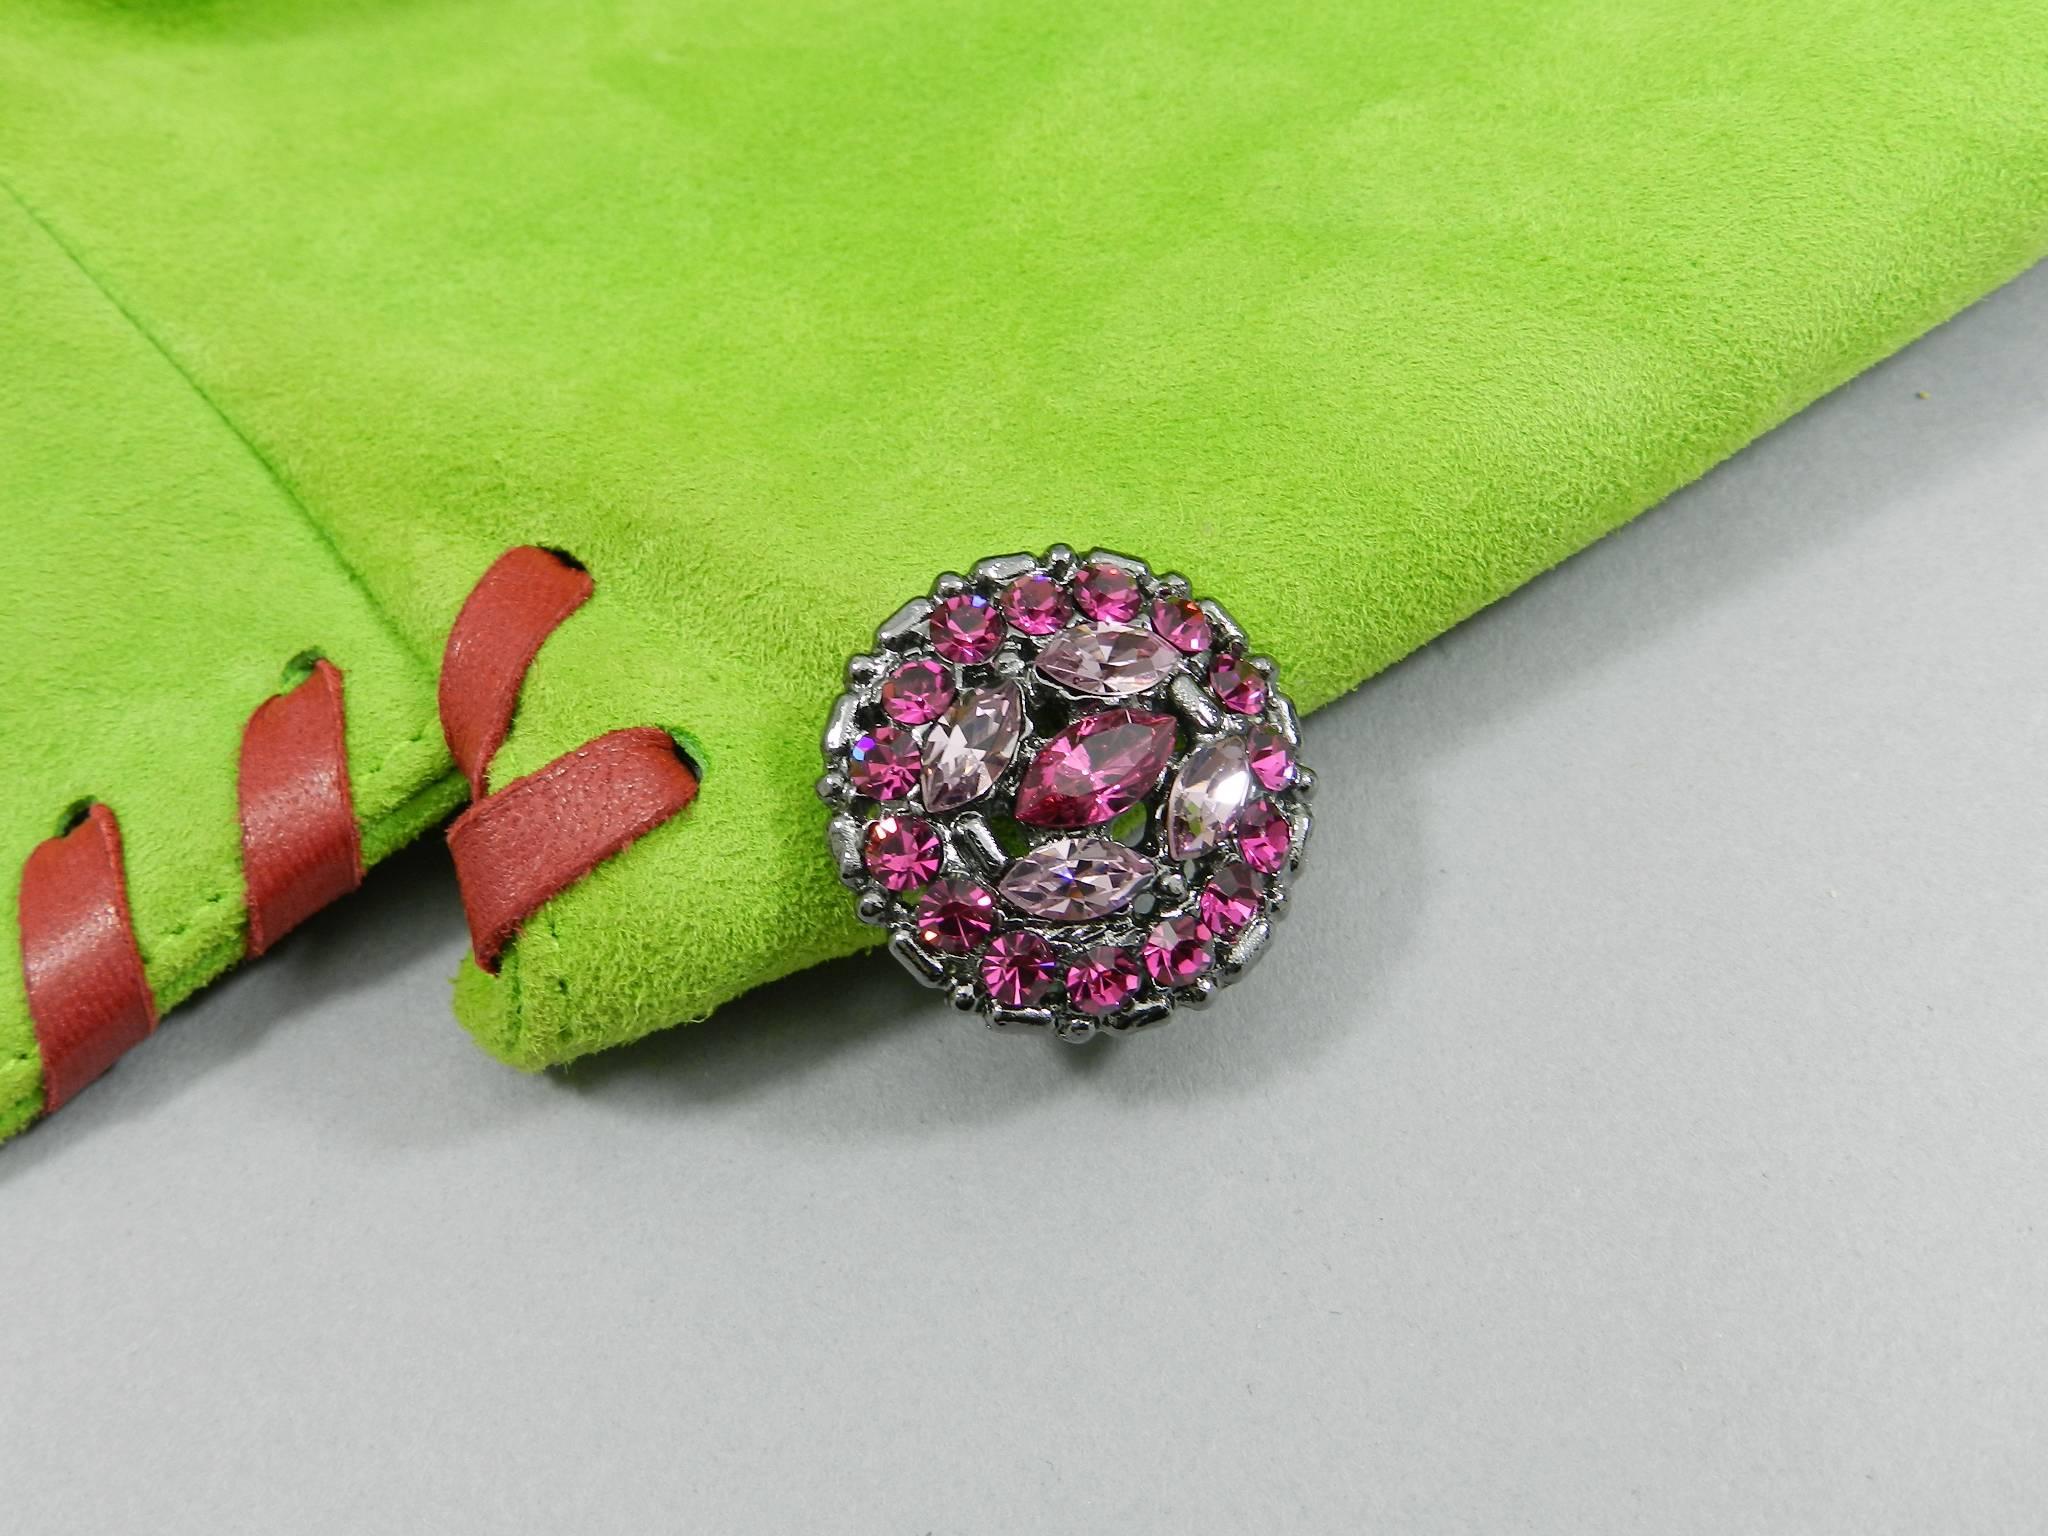 Yves Saint Laurent AW 1999 Haute Couture Lime Green and Fuchsia Suede Jacket For Sale 2